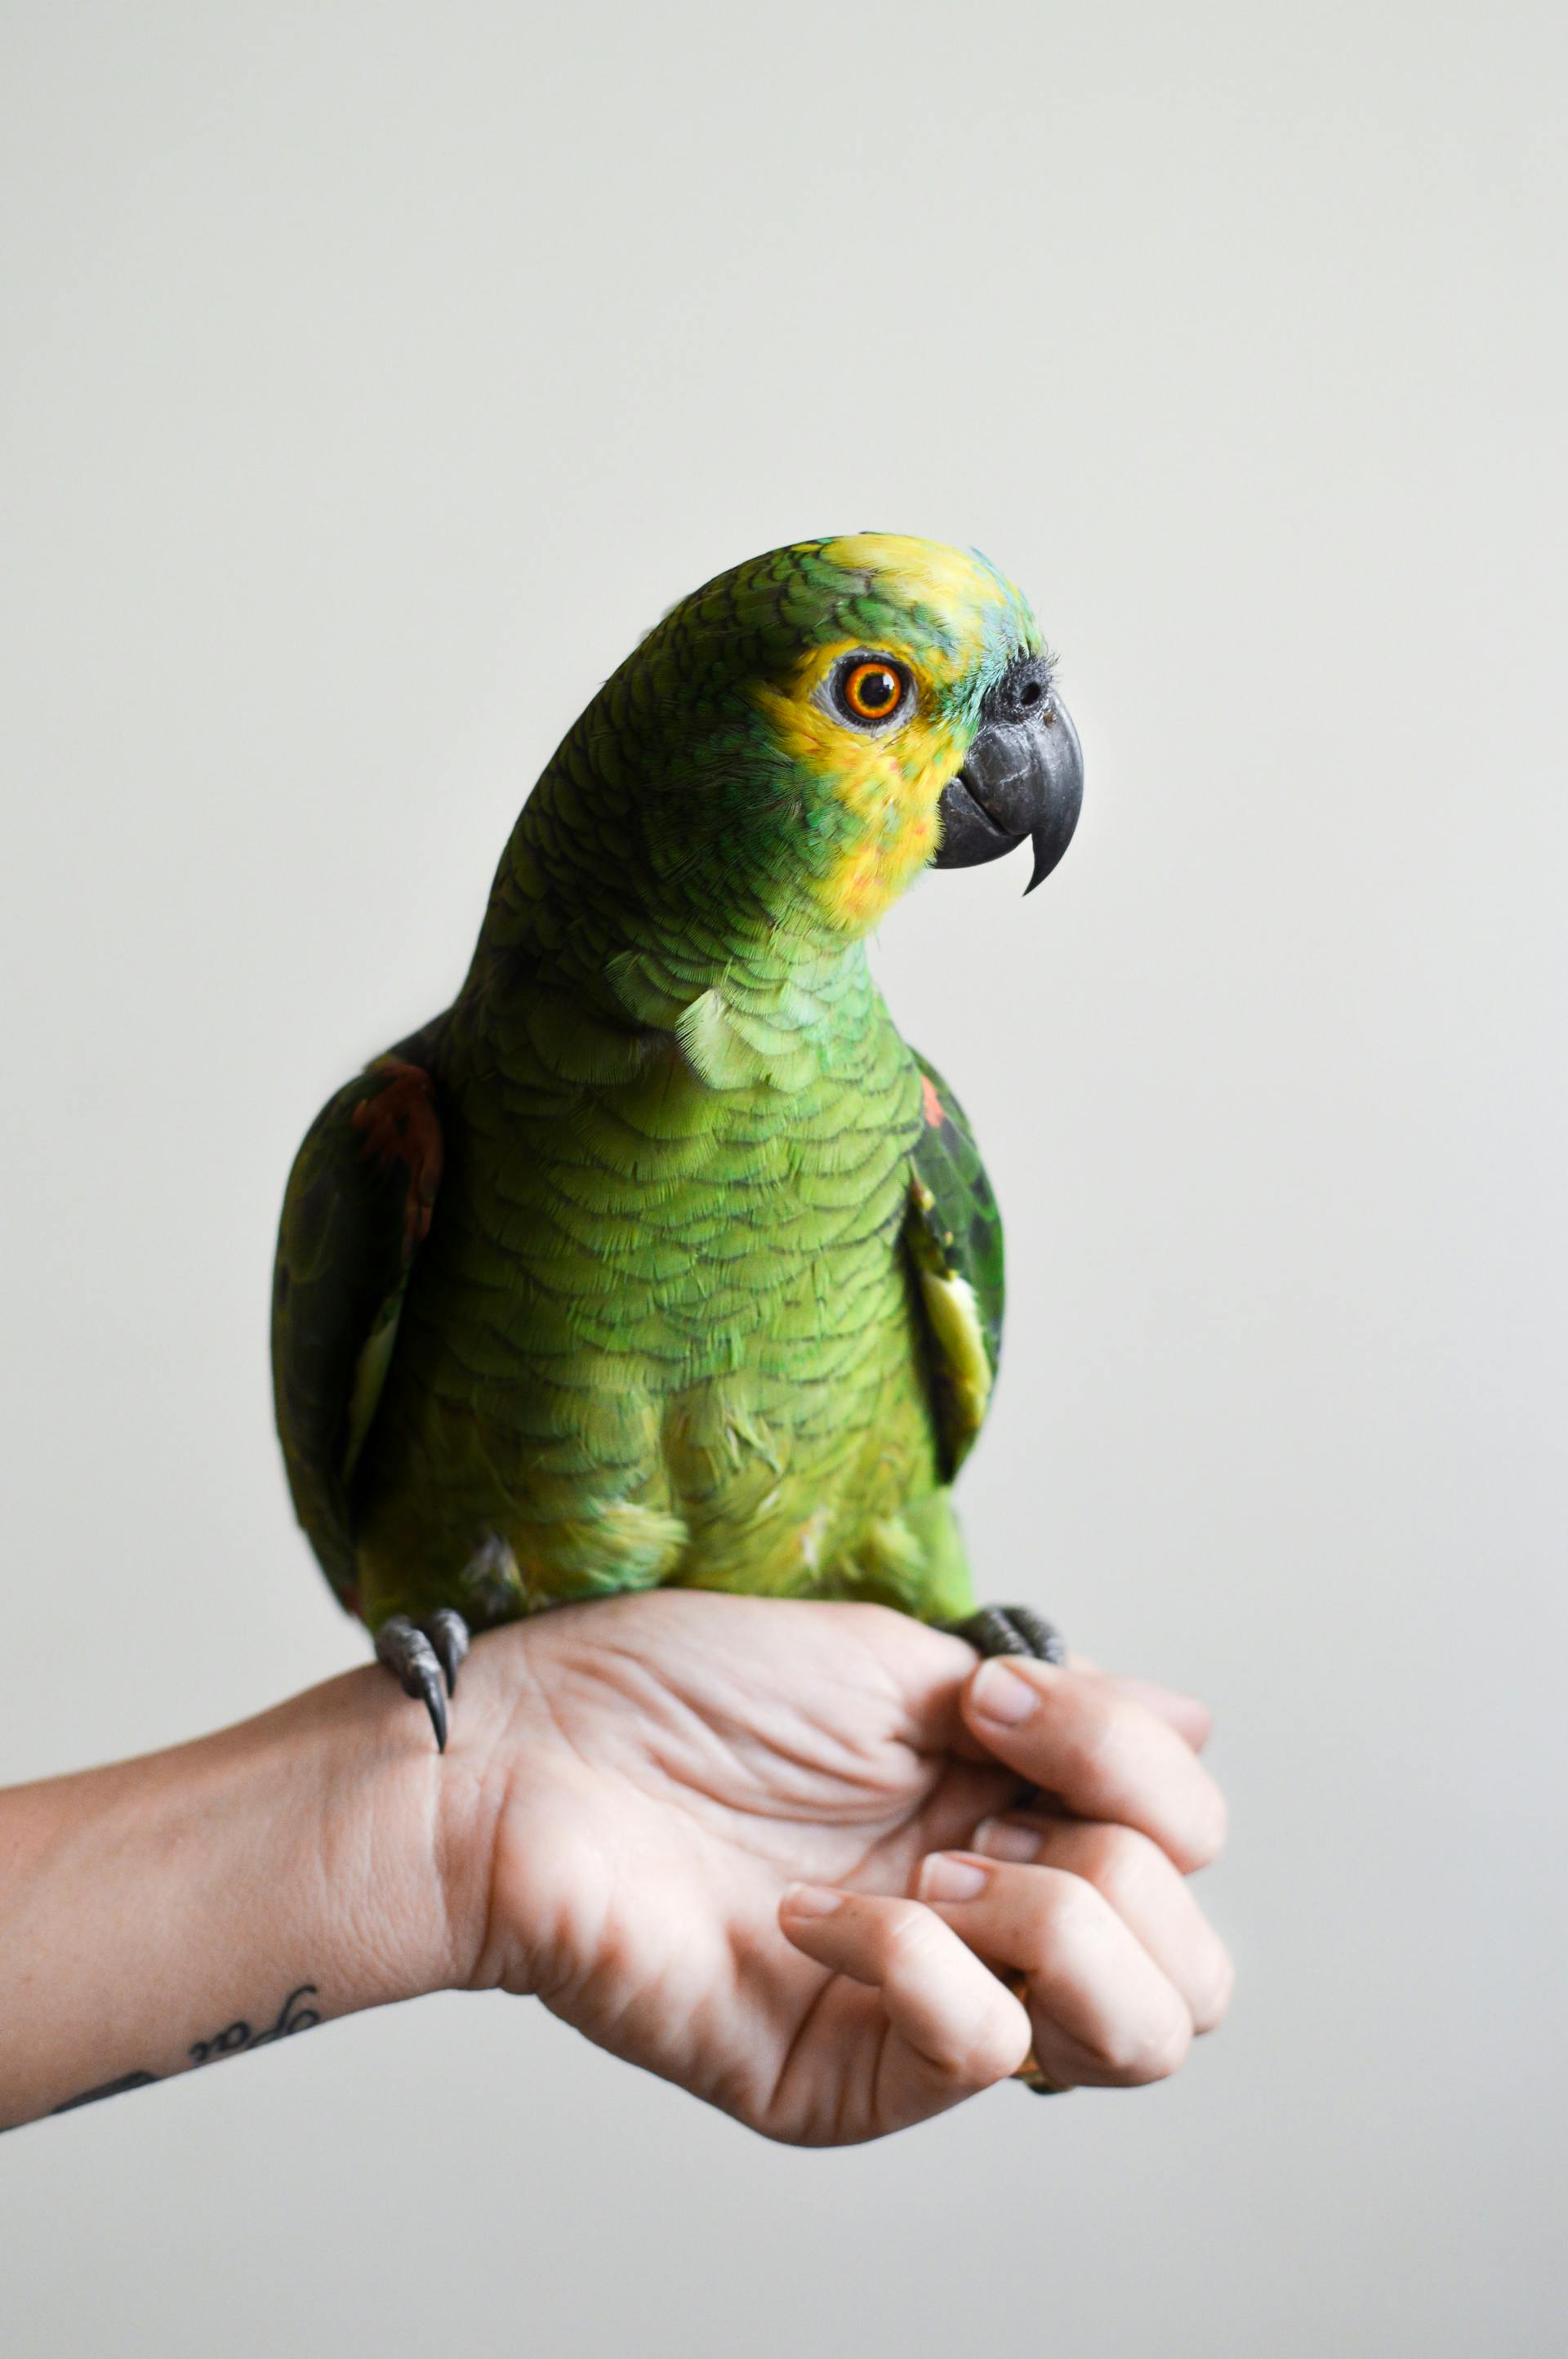 A green parrot on a person's arm | Source: Pexels